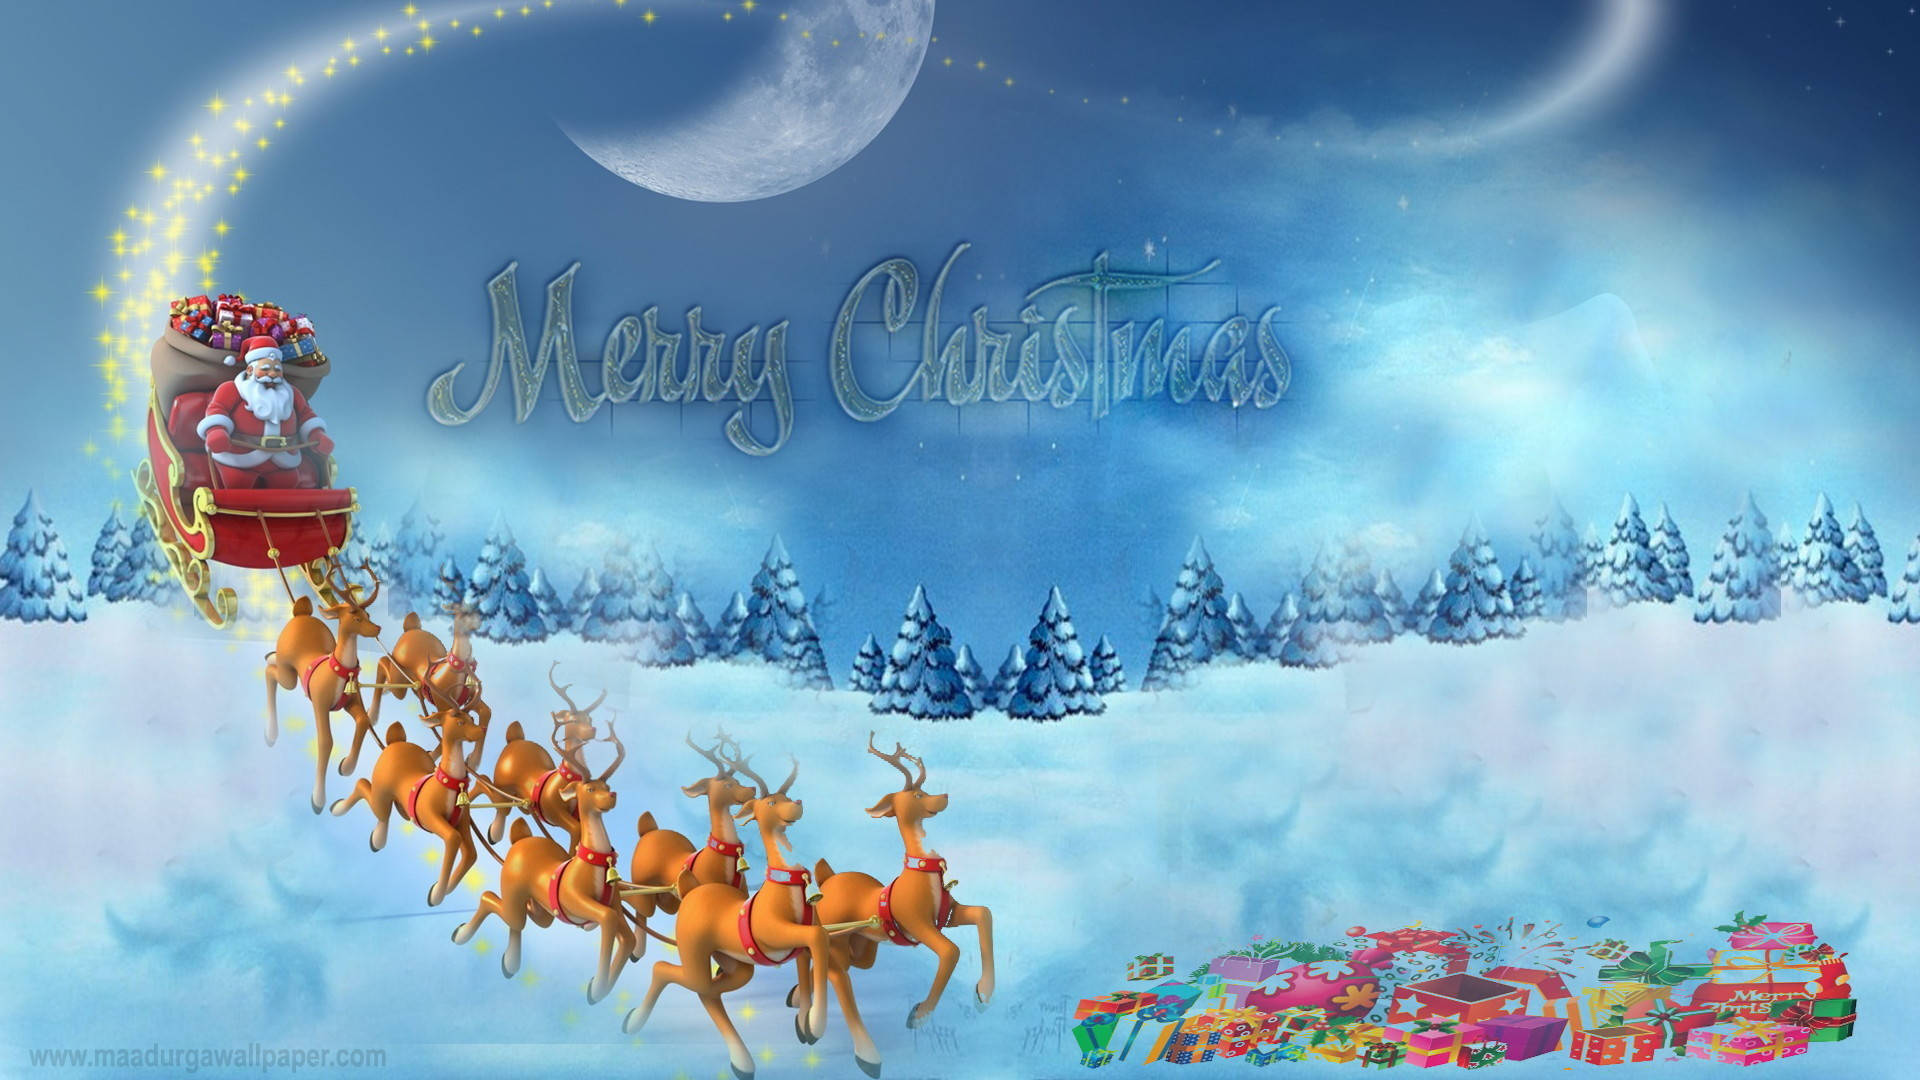 Christmas Laptop Sleigh Holiday Greetings Background